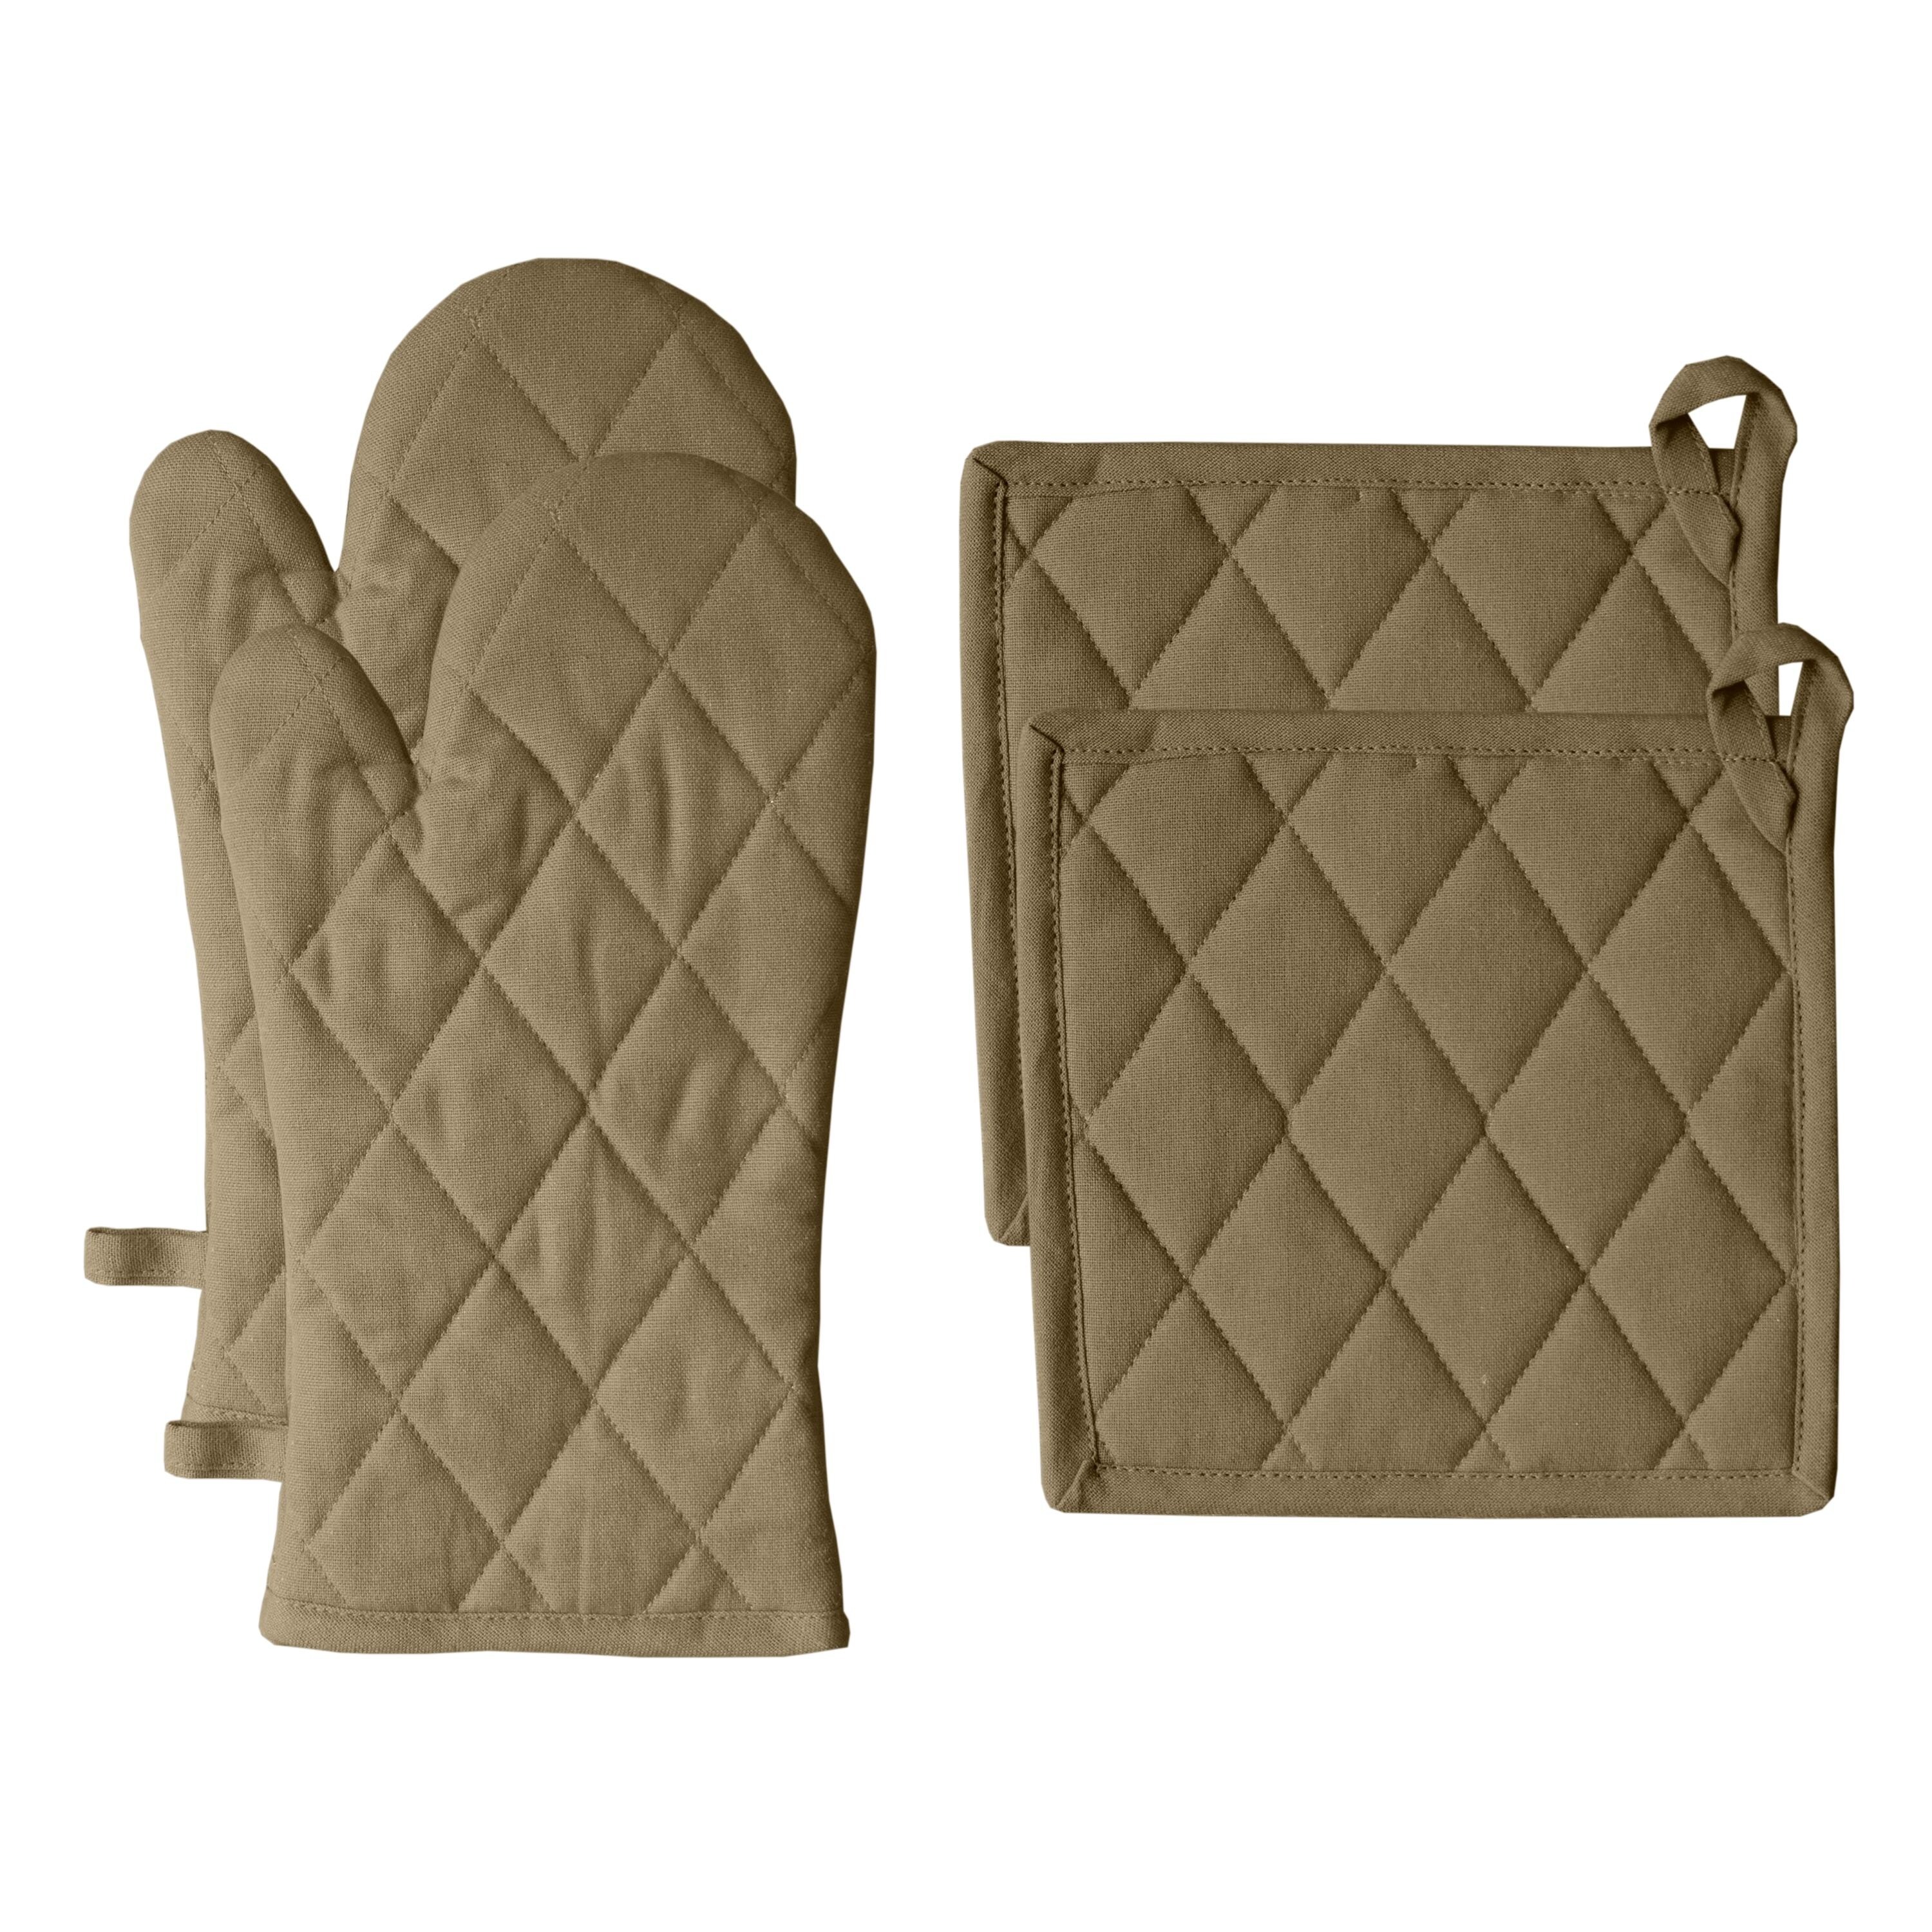 https://ak1.ostkcdn.com/images/products/is/images/direct/00d200e48f3307310cd62fd4bc2df376234727be/Fabstyles-Solo-Waffle-Cotton-Oven-Mitt-%26-Pot-Holder-Set-of-4.jpg